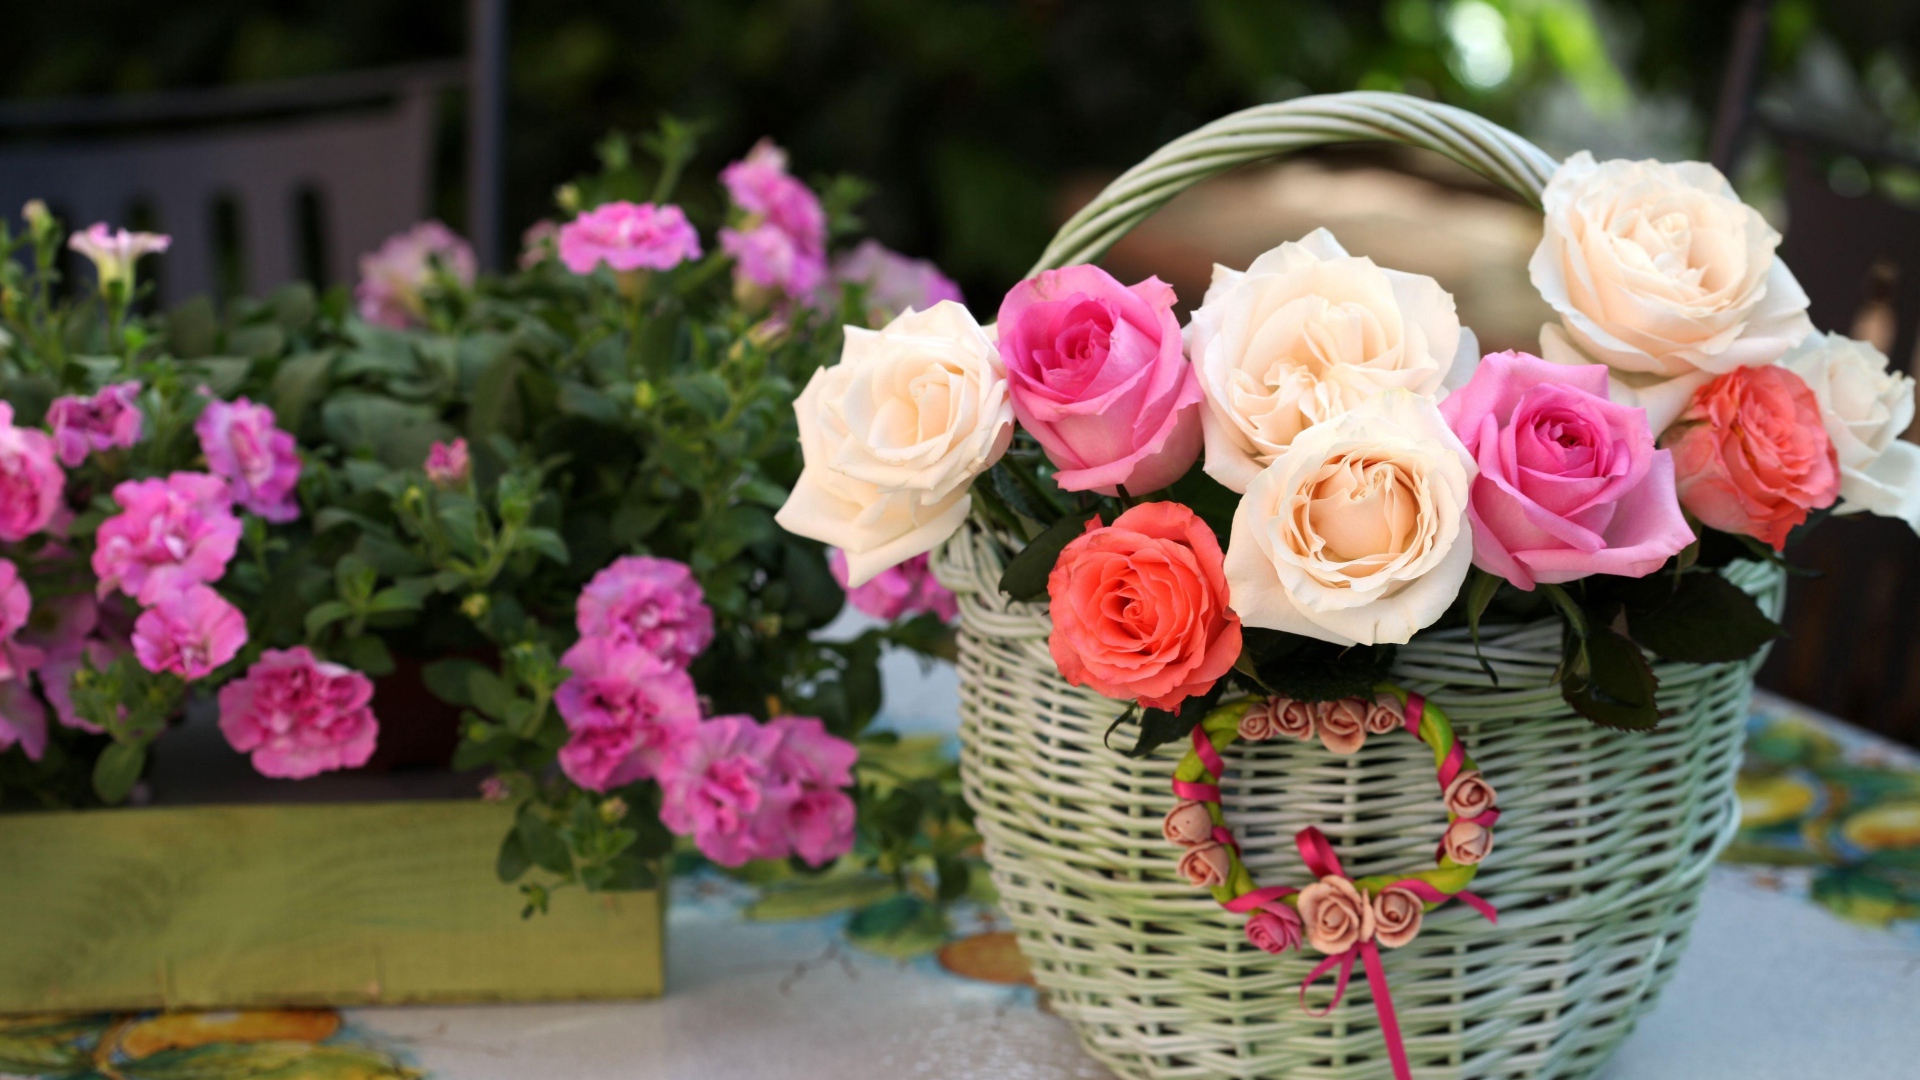 A bouquet of delicate roses in a basket on the table with flowers